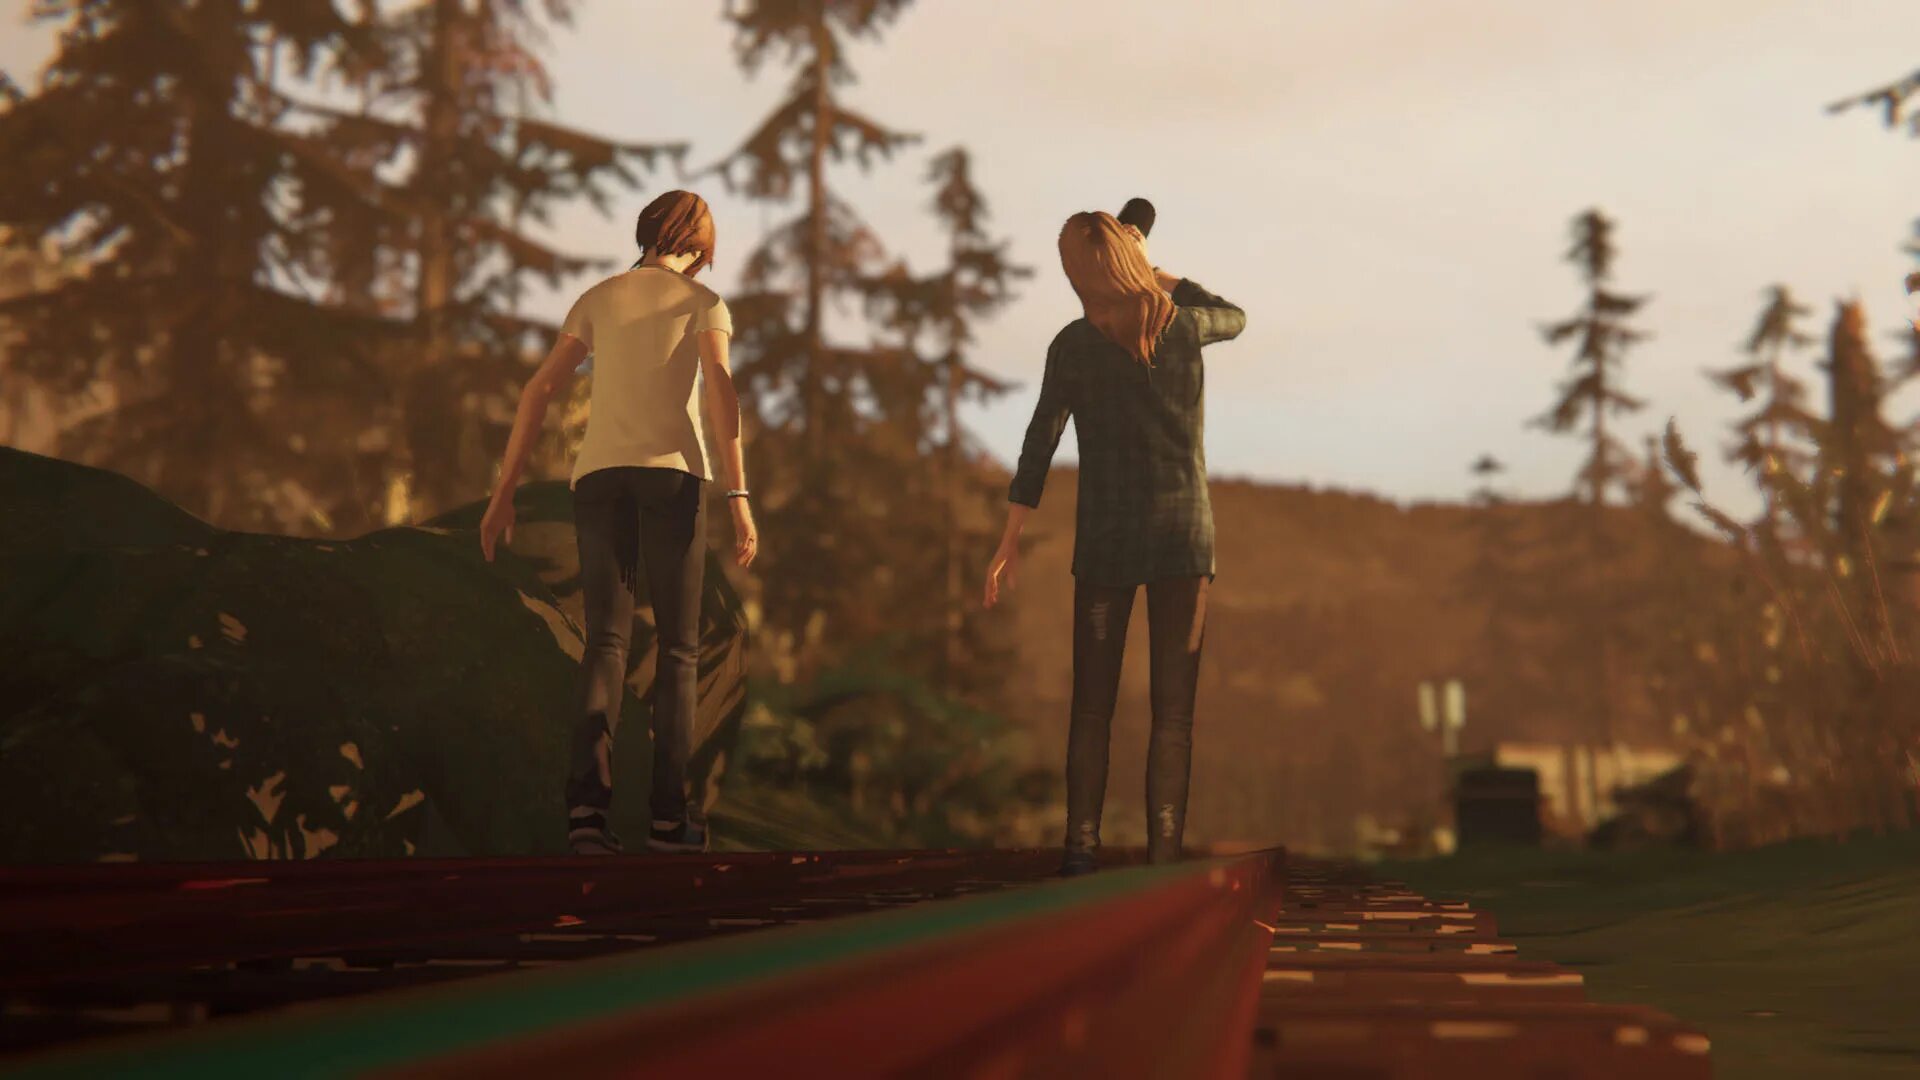 Life is Strange: before the Storm. Life is Strange: before the Storm Wallpaper Рэйчел. Life is Strange before the Storm screenshots. Life is Strange BTS. 1wooxx life